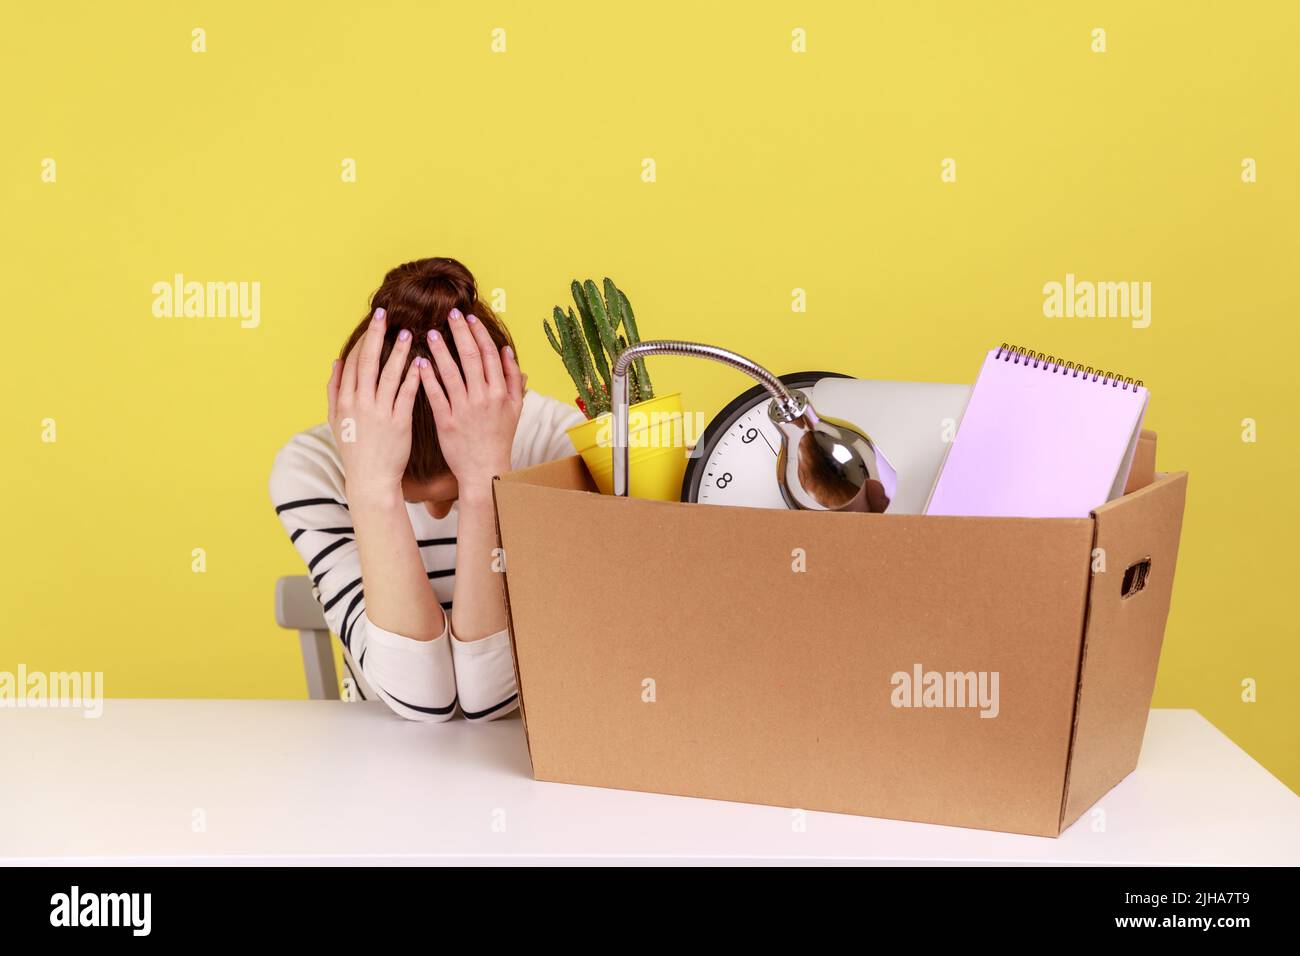 Sad upset desperate young woman office worker sitting at workplace with cardboard box with her things, tilted her head in despair. Indoor studio studio shot isolated on yellow background. Stock Photo